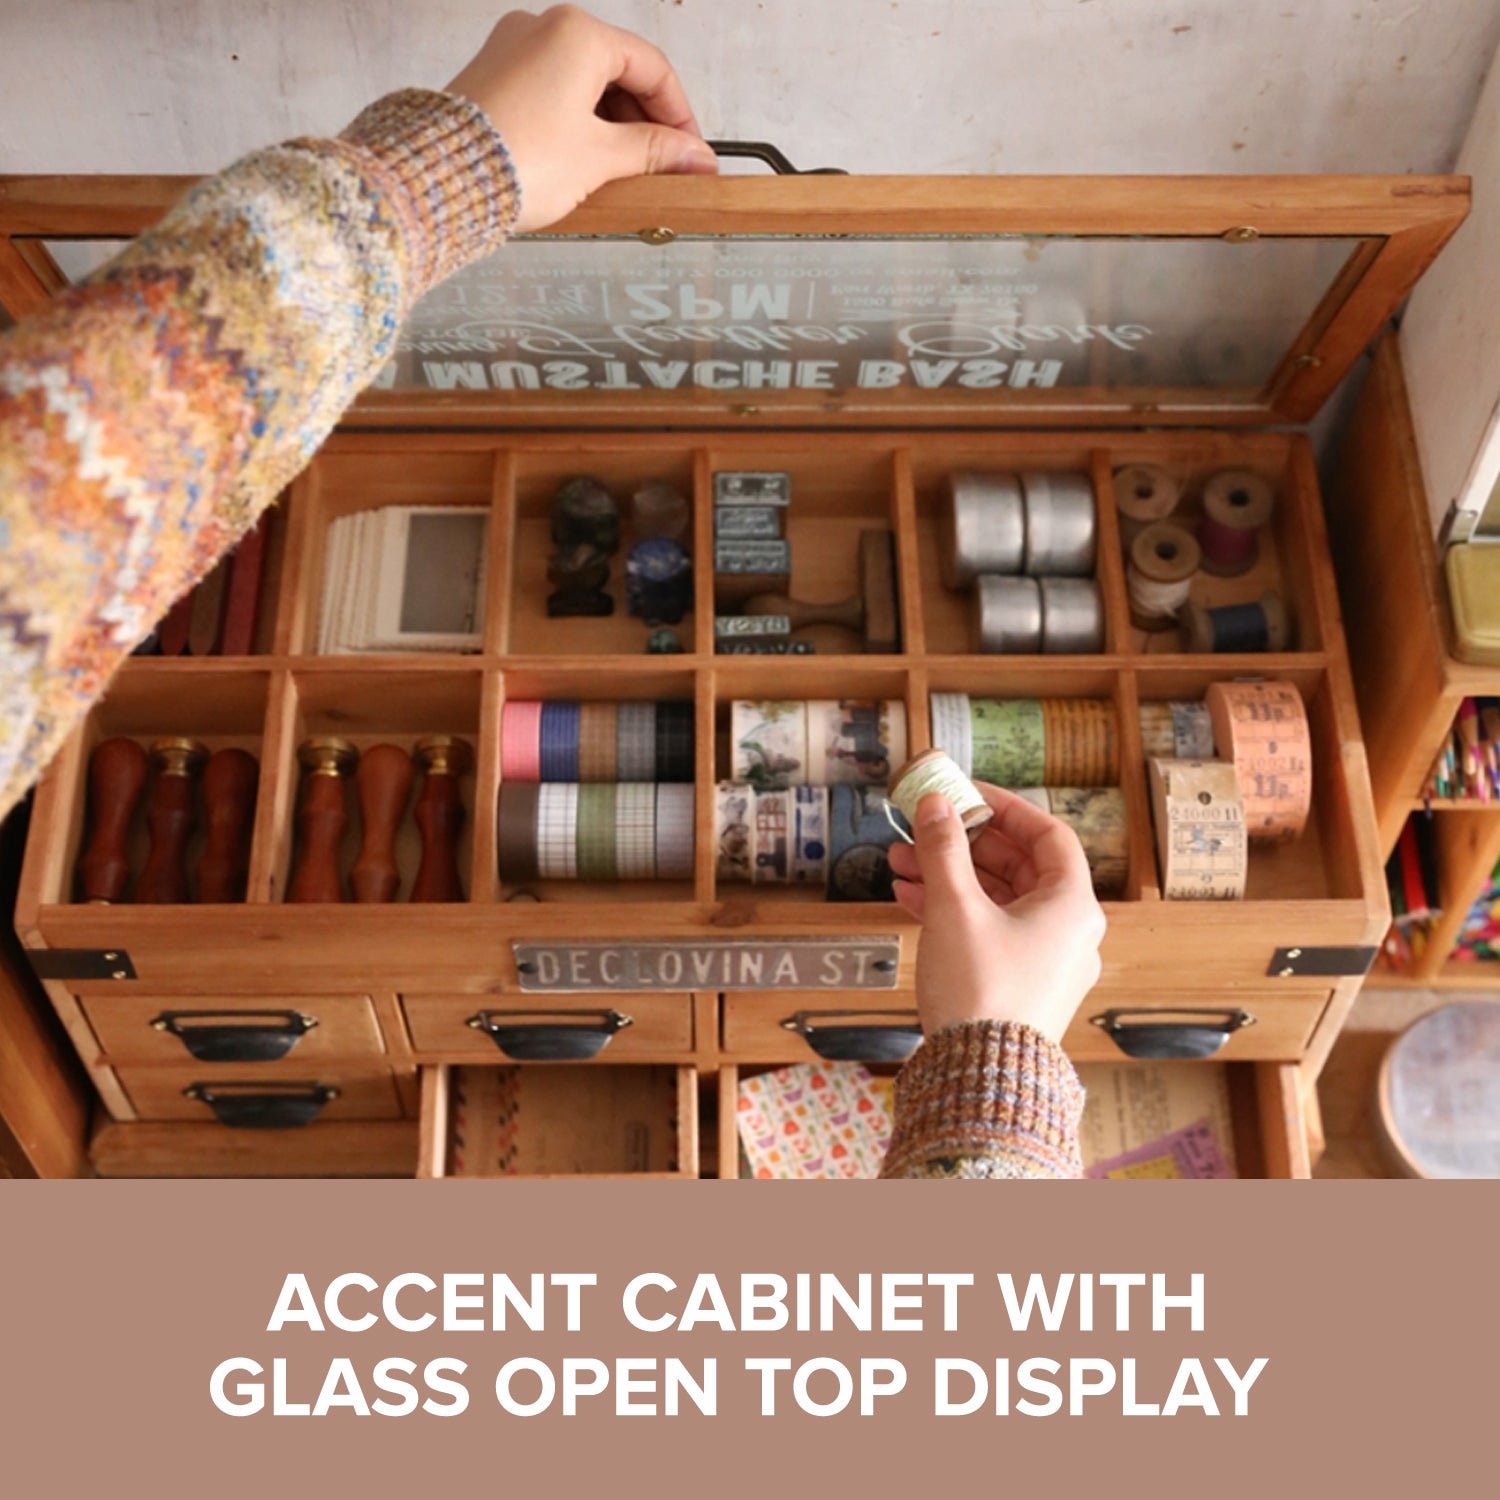 Load image into Gallery viewer, 8-Drawer Wooden Cabinet | Chest of Drawers w/ Top Glass Display High End Bedroom Closet Storage